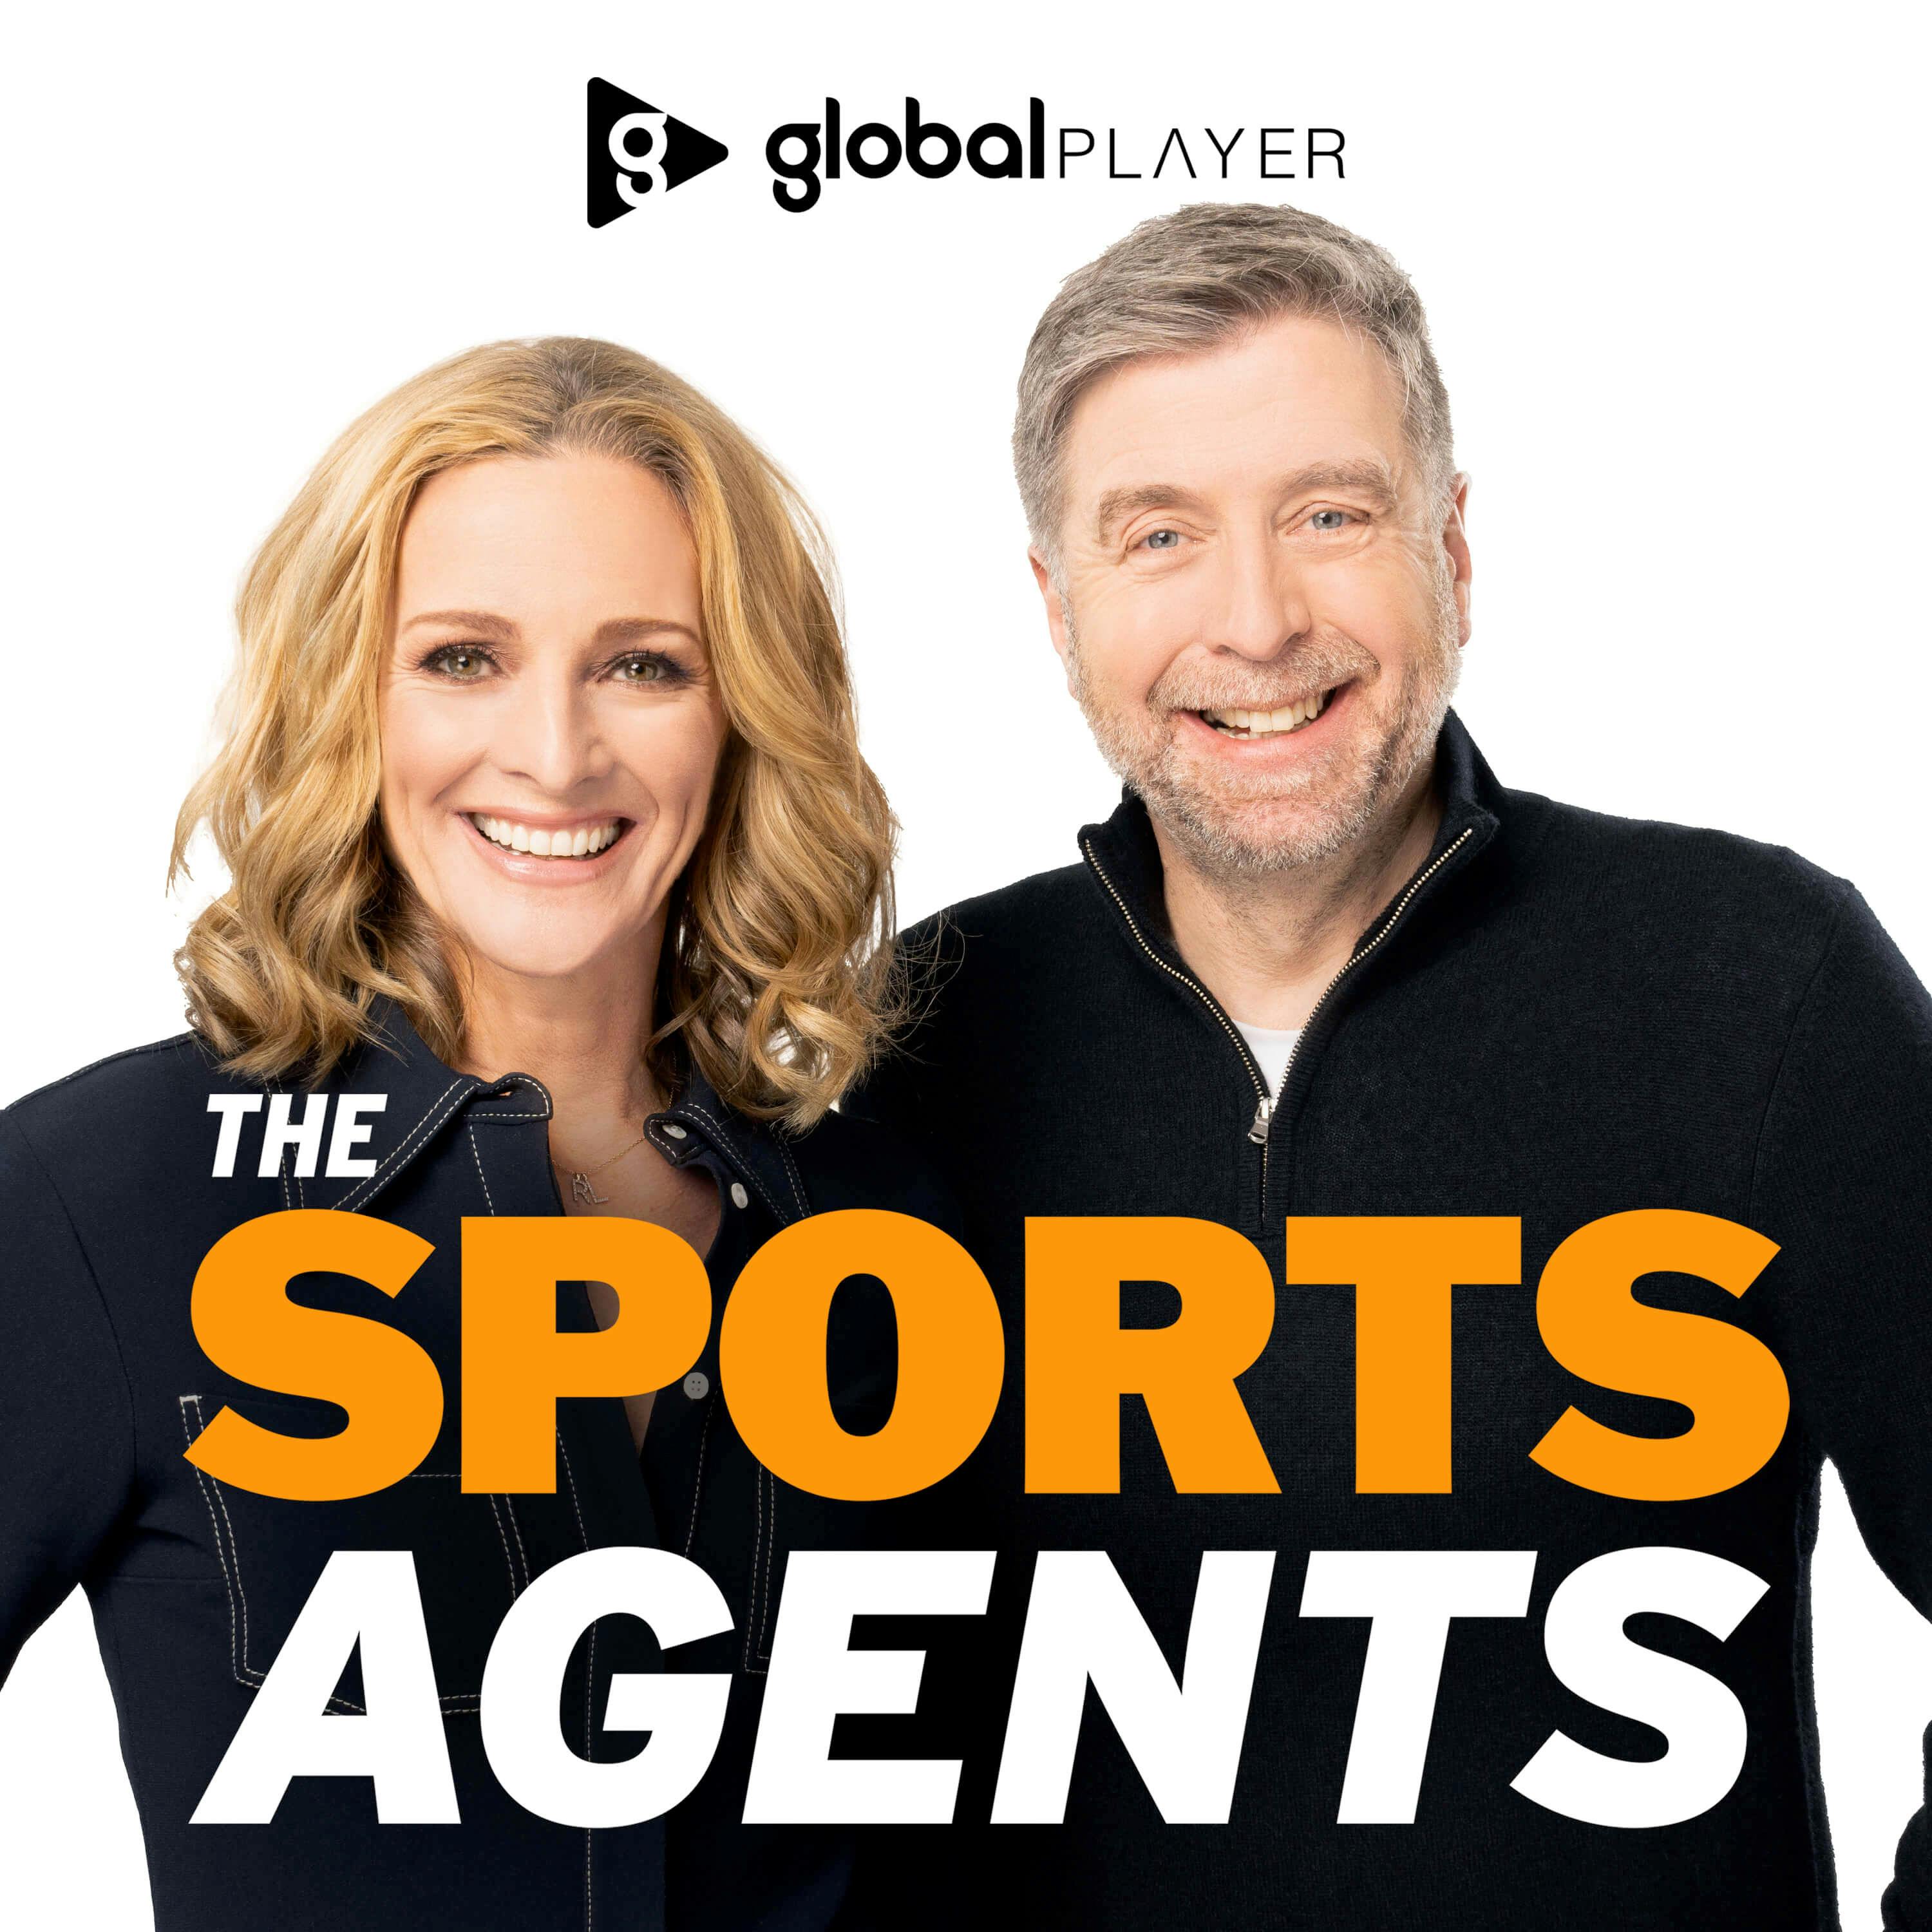 The Sports Agents